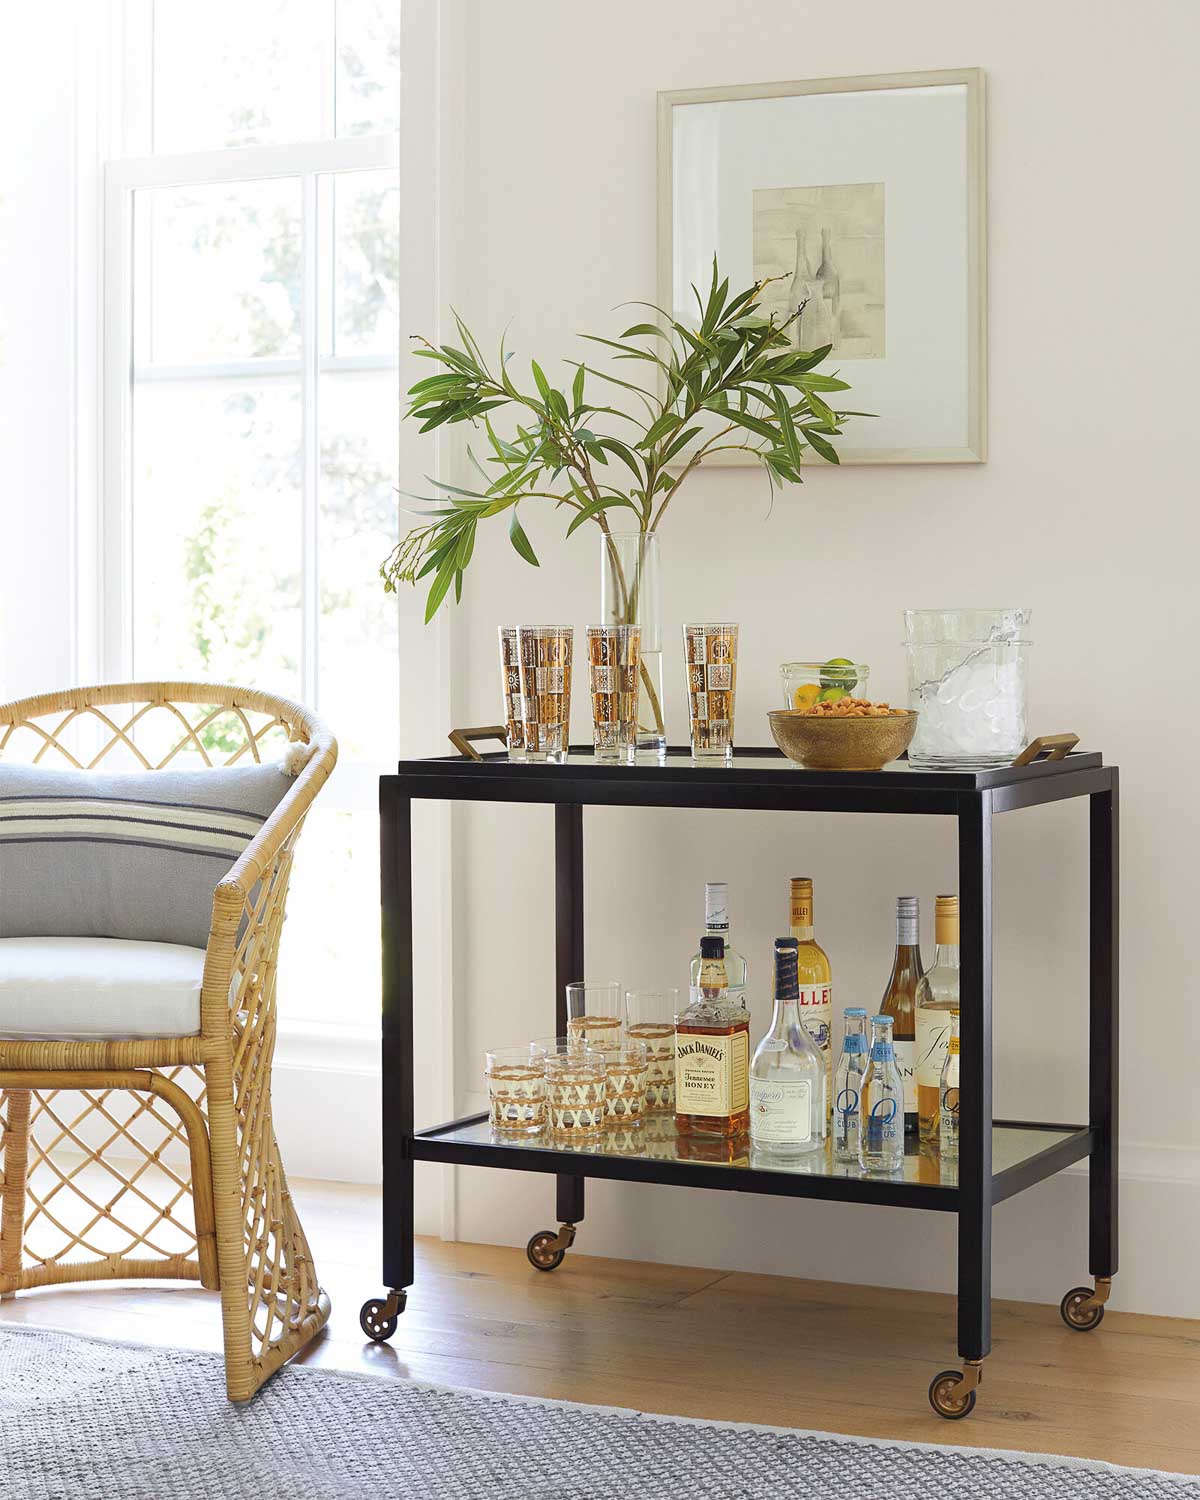 Bar cart with art hung above it as dining room wall decor